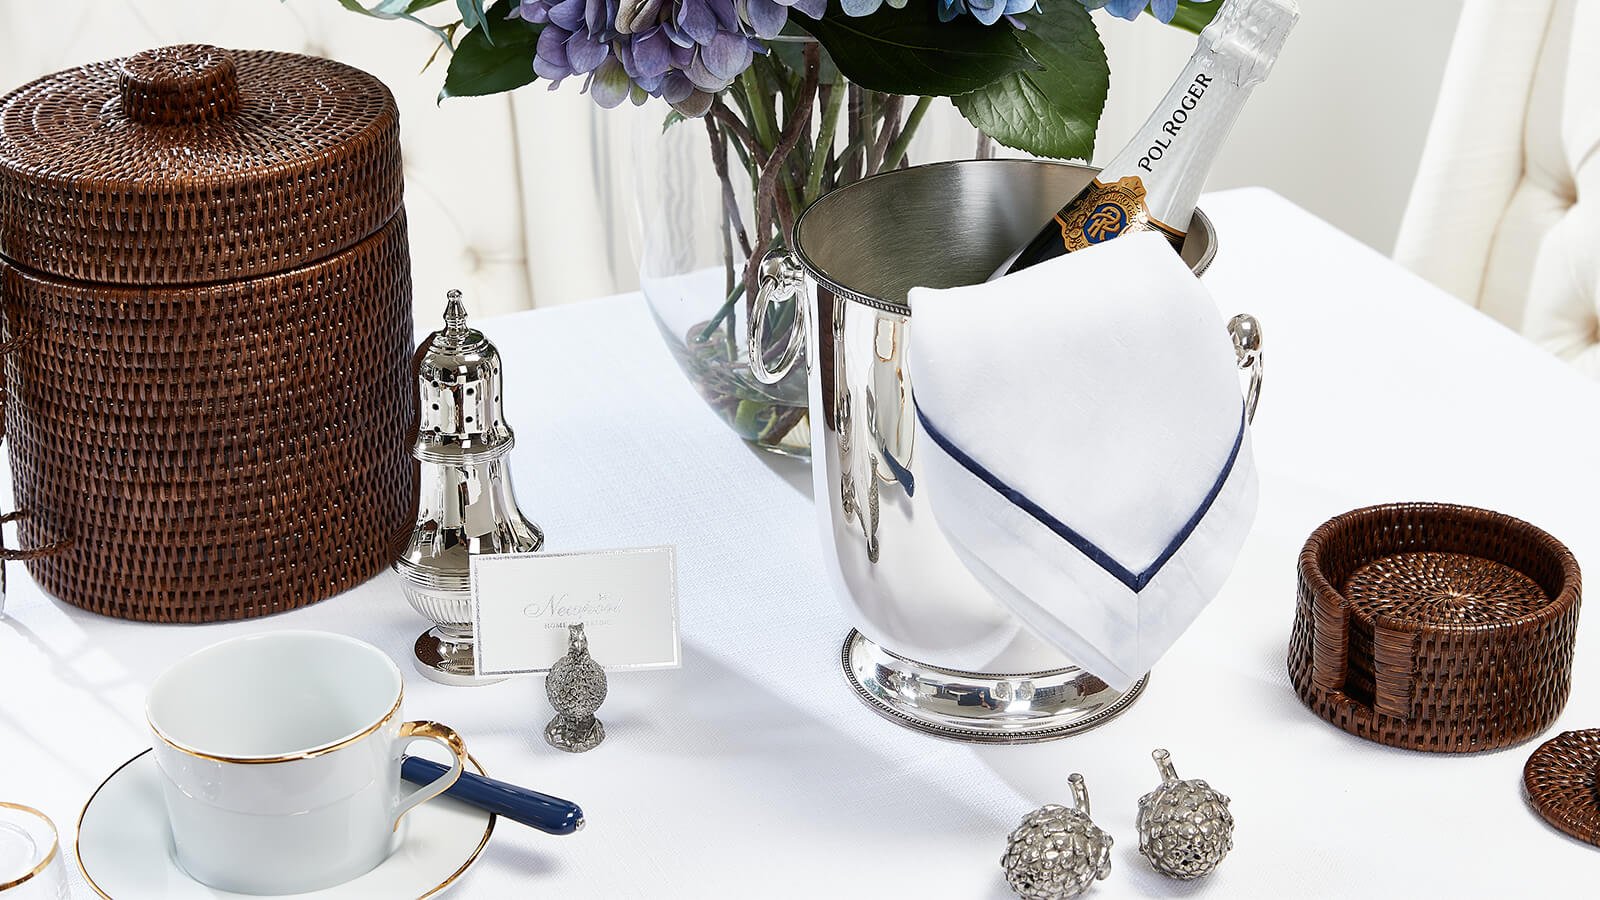 Details | Classic details for table settings